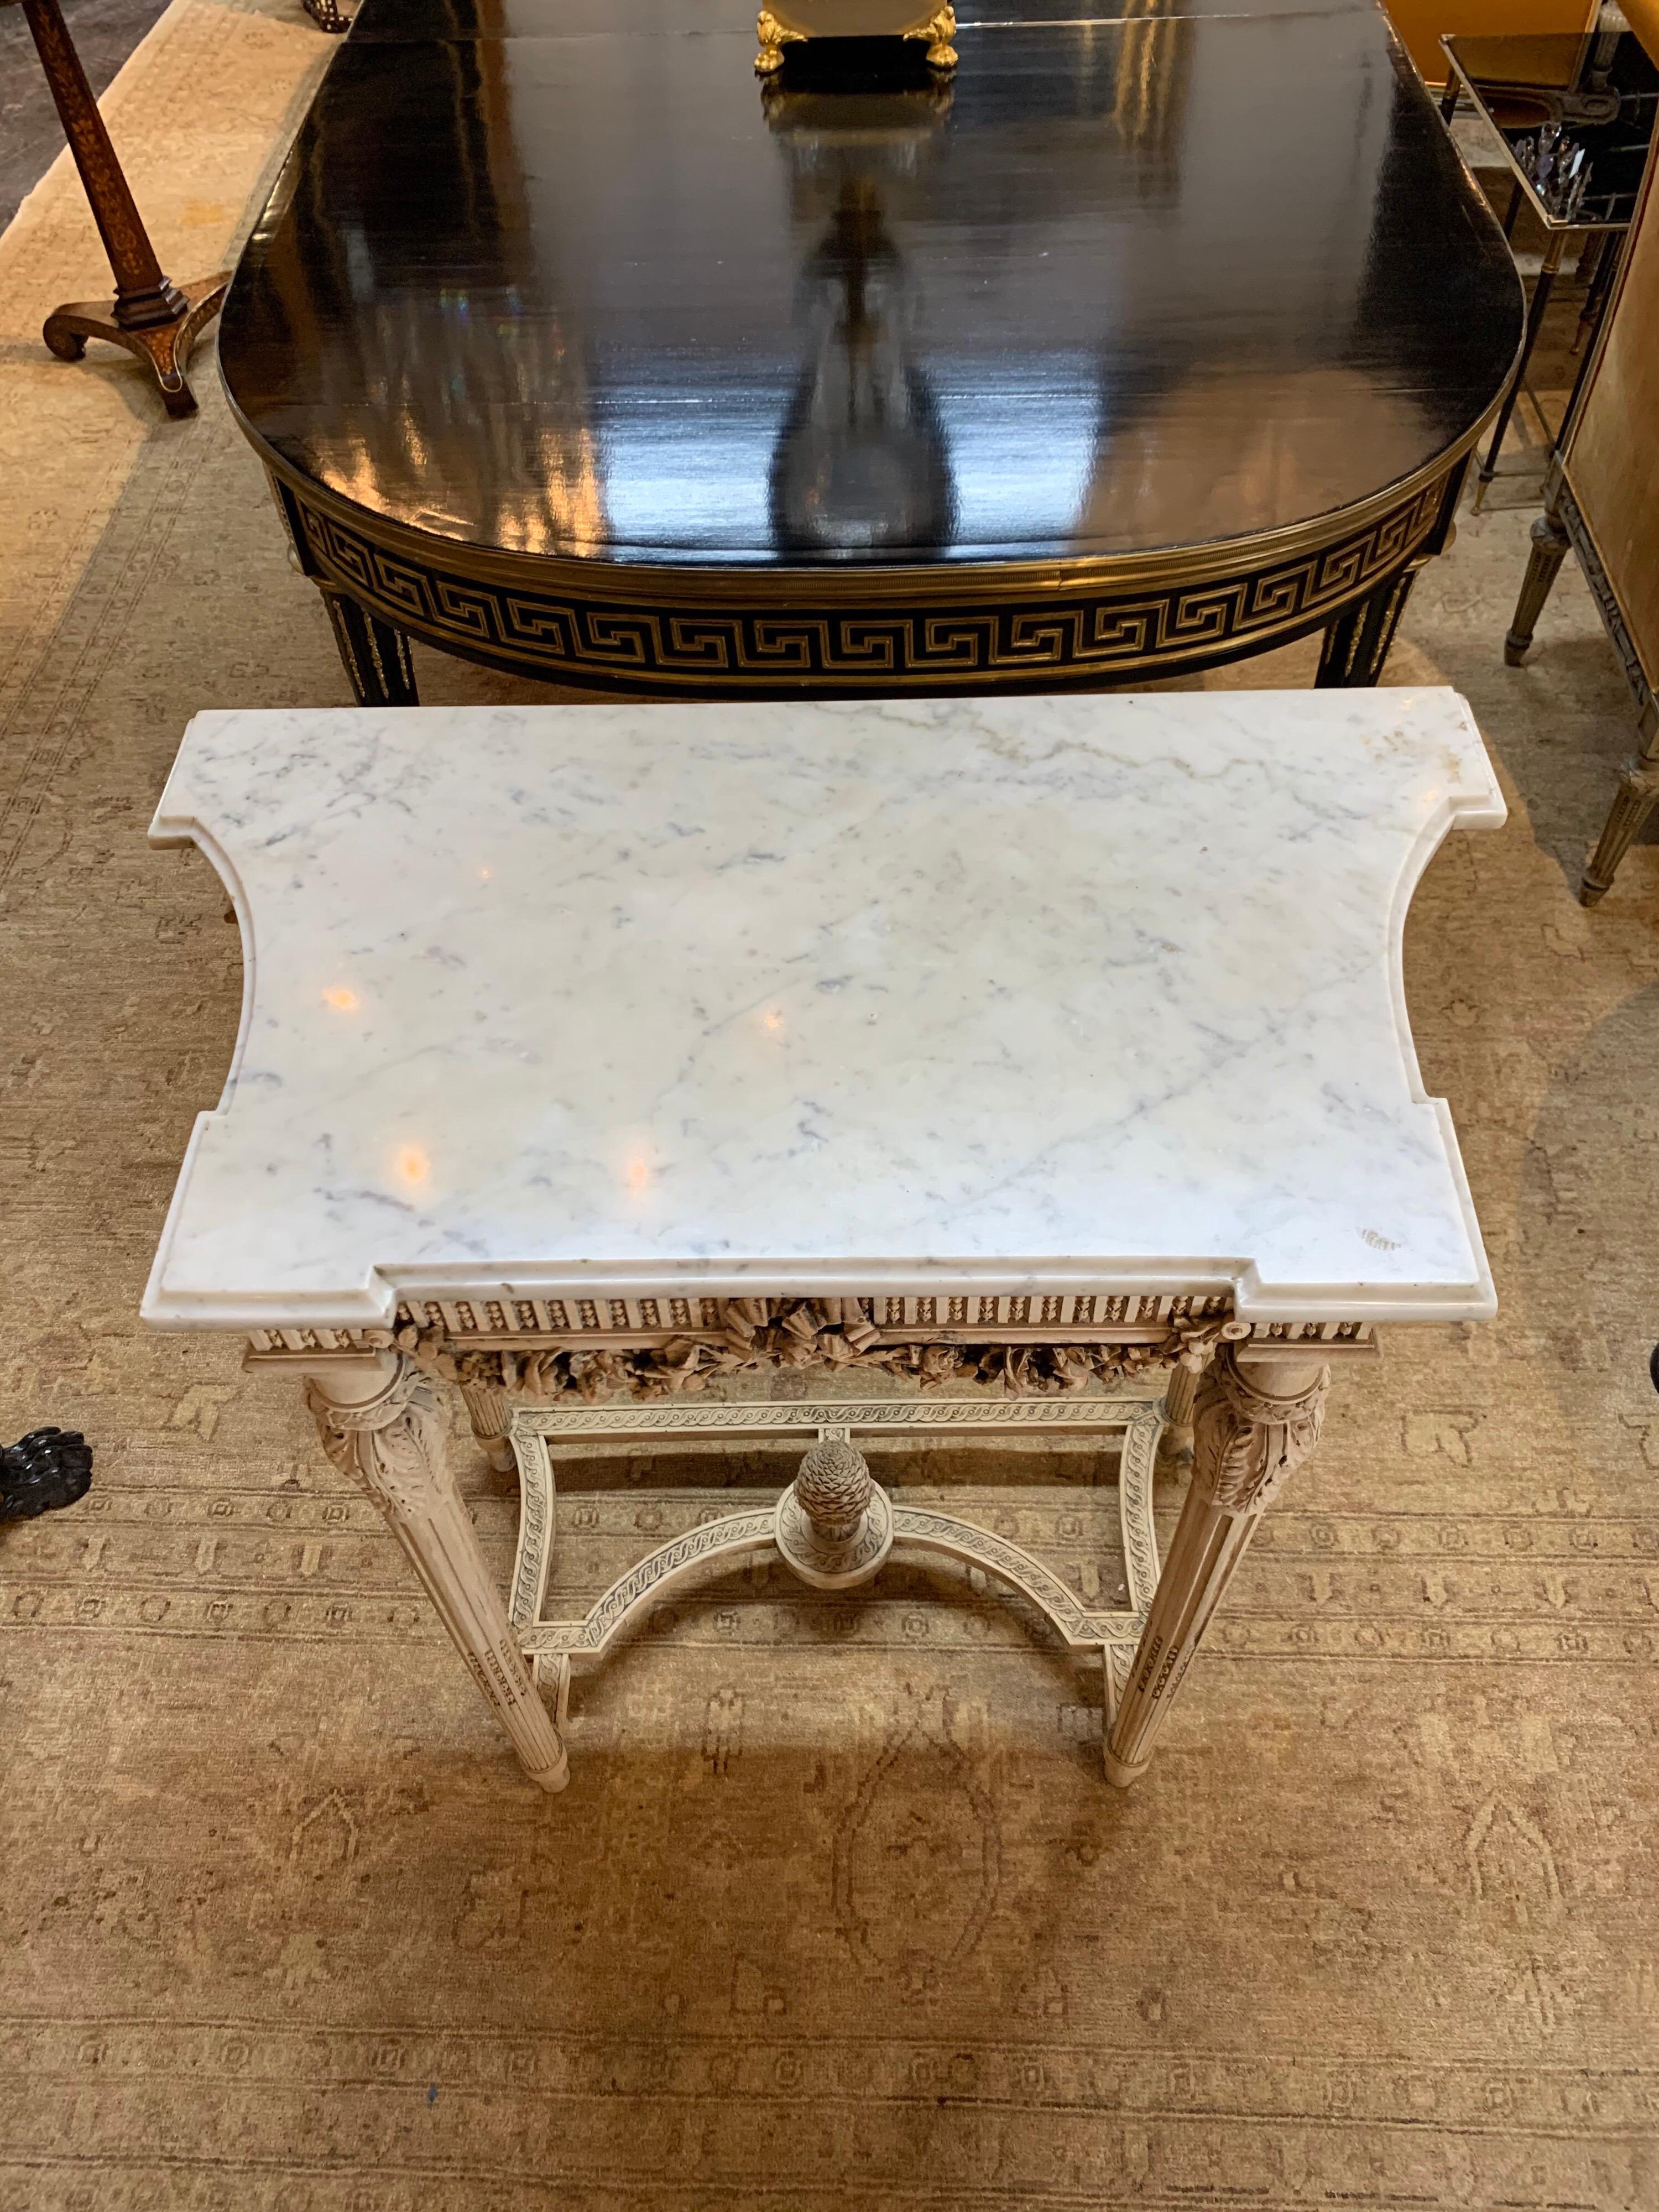 Beautiful 19th century French Louis XVI style console with bleached walnut carved base and a Carrara marble top. Very fine intricate carving makes this piece extra special!